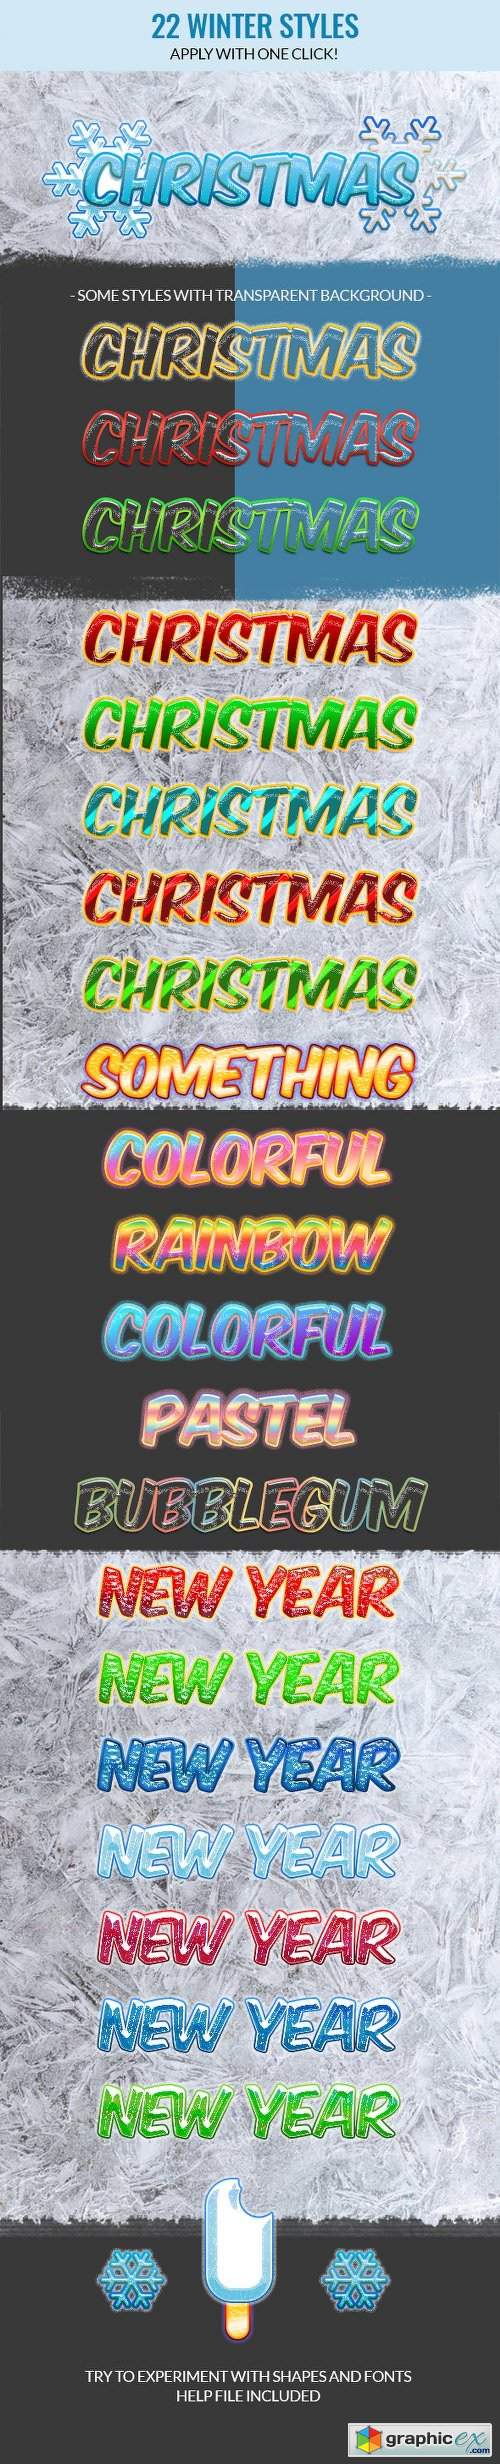 Holiday Christmas Photoshop Text Styles